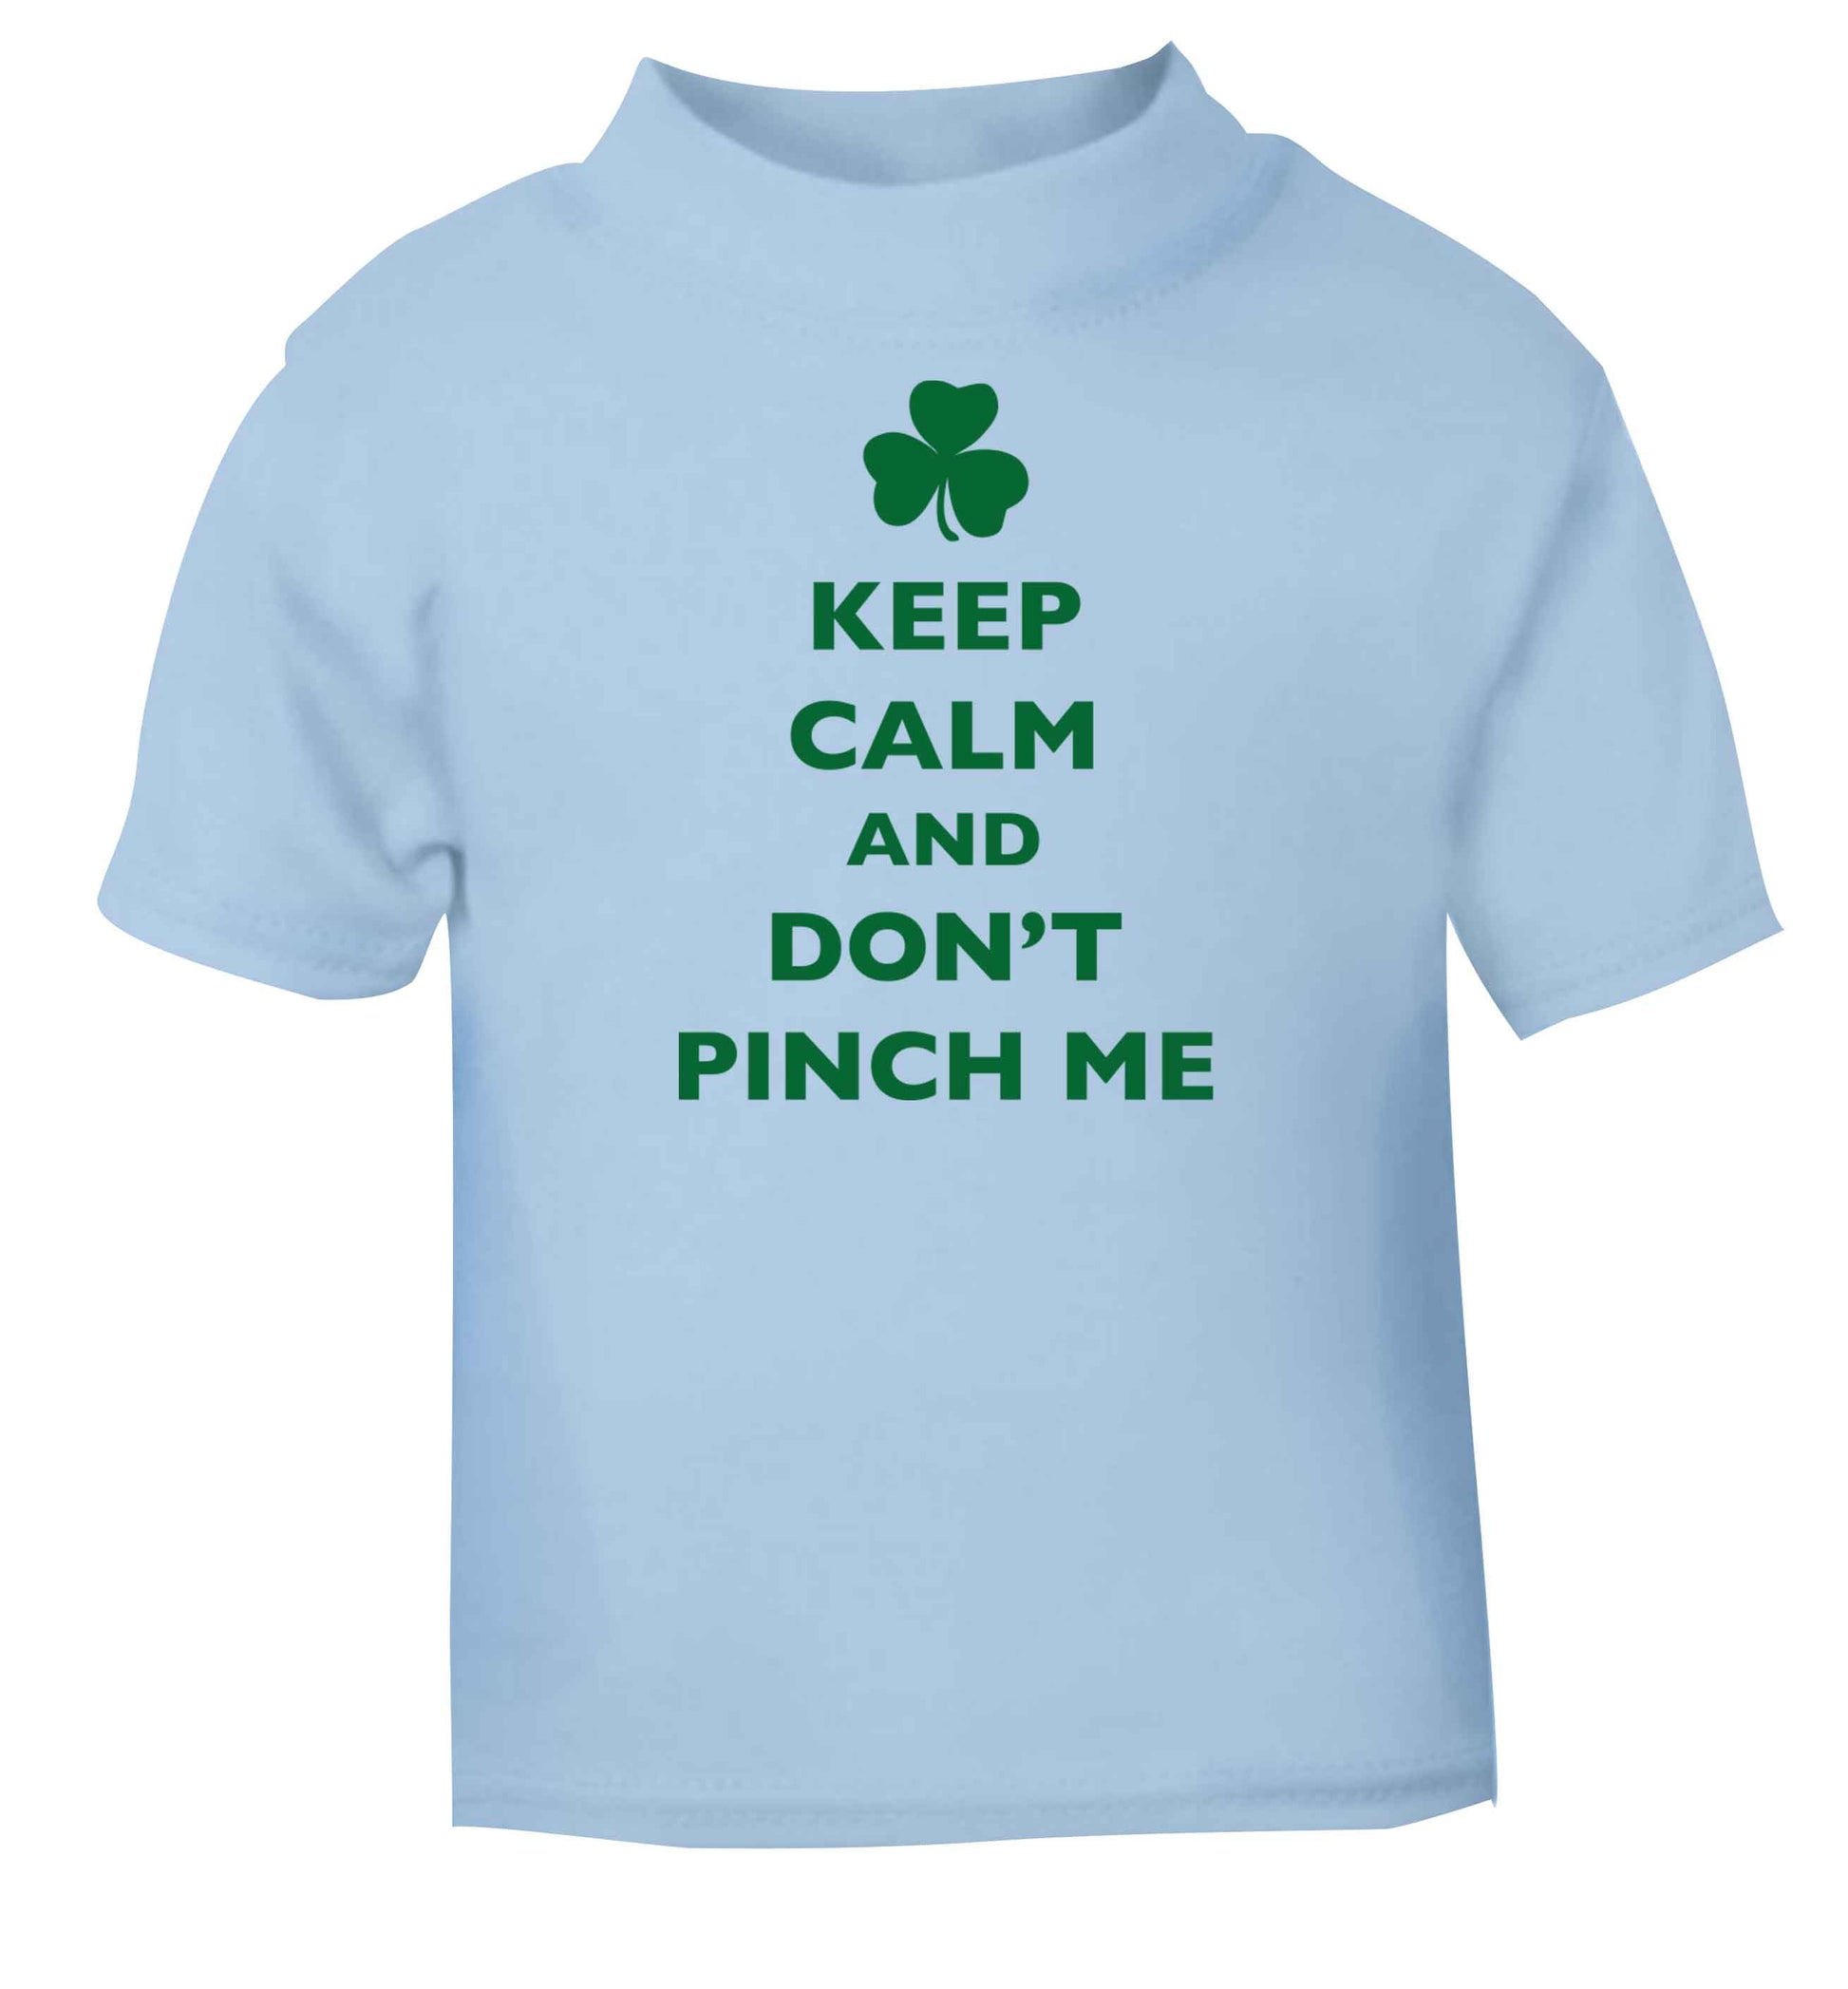 Keep calm and don't pinch me light blue baby toddler Tshirt 2 Years